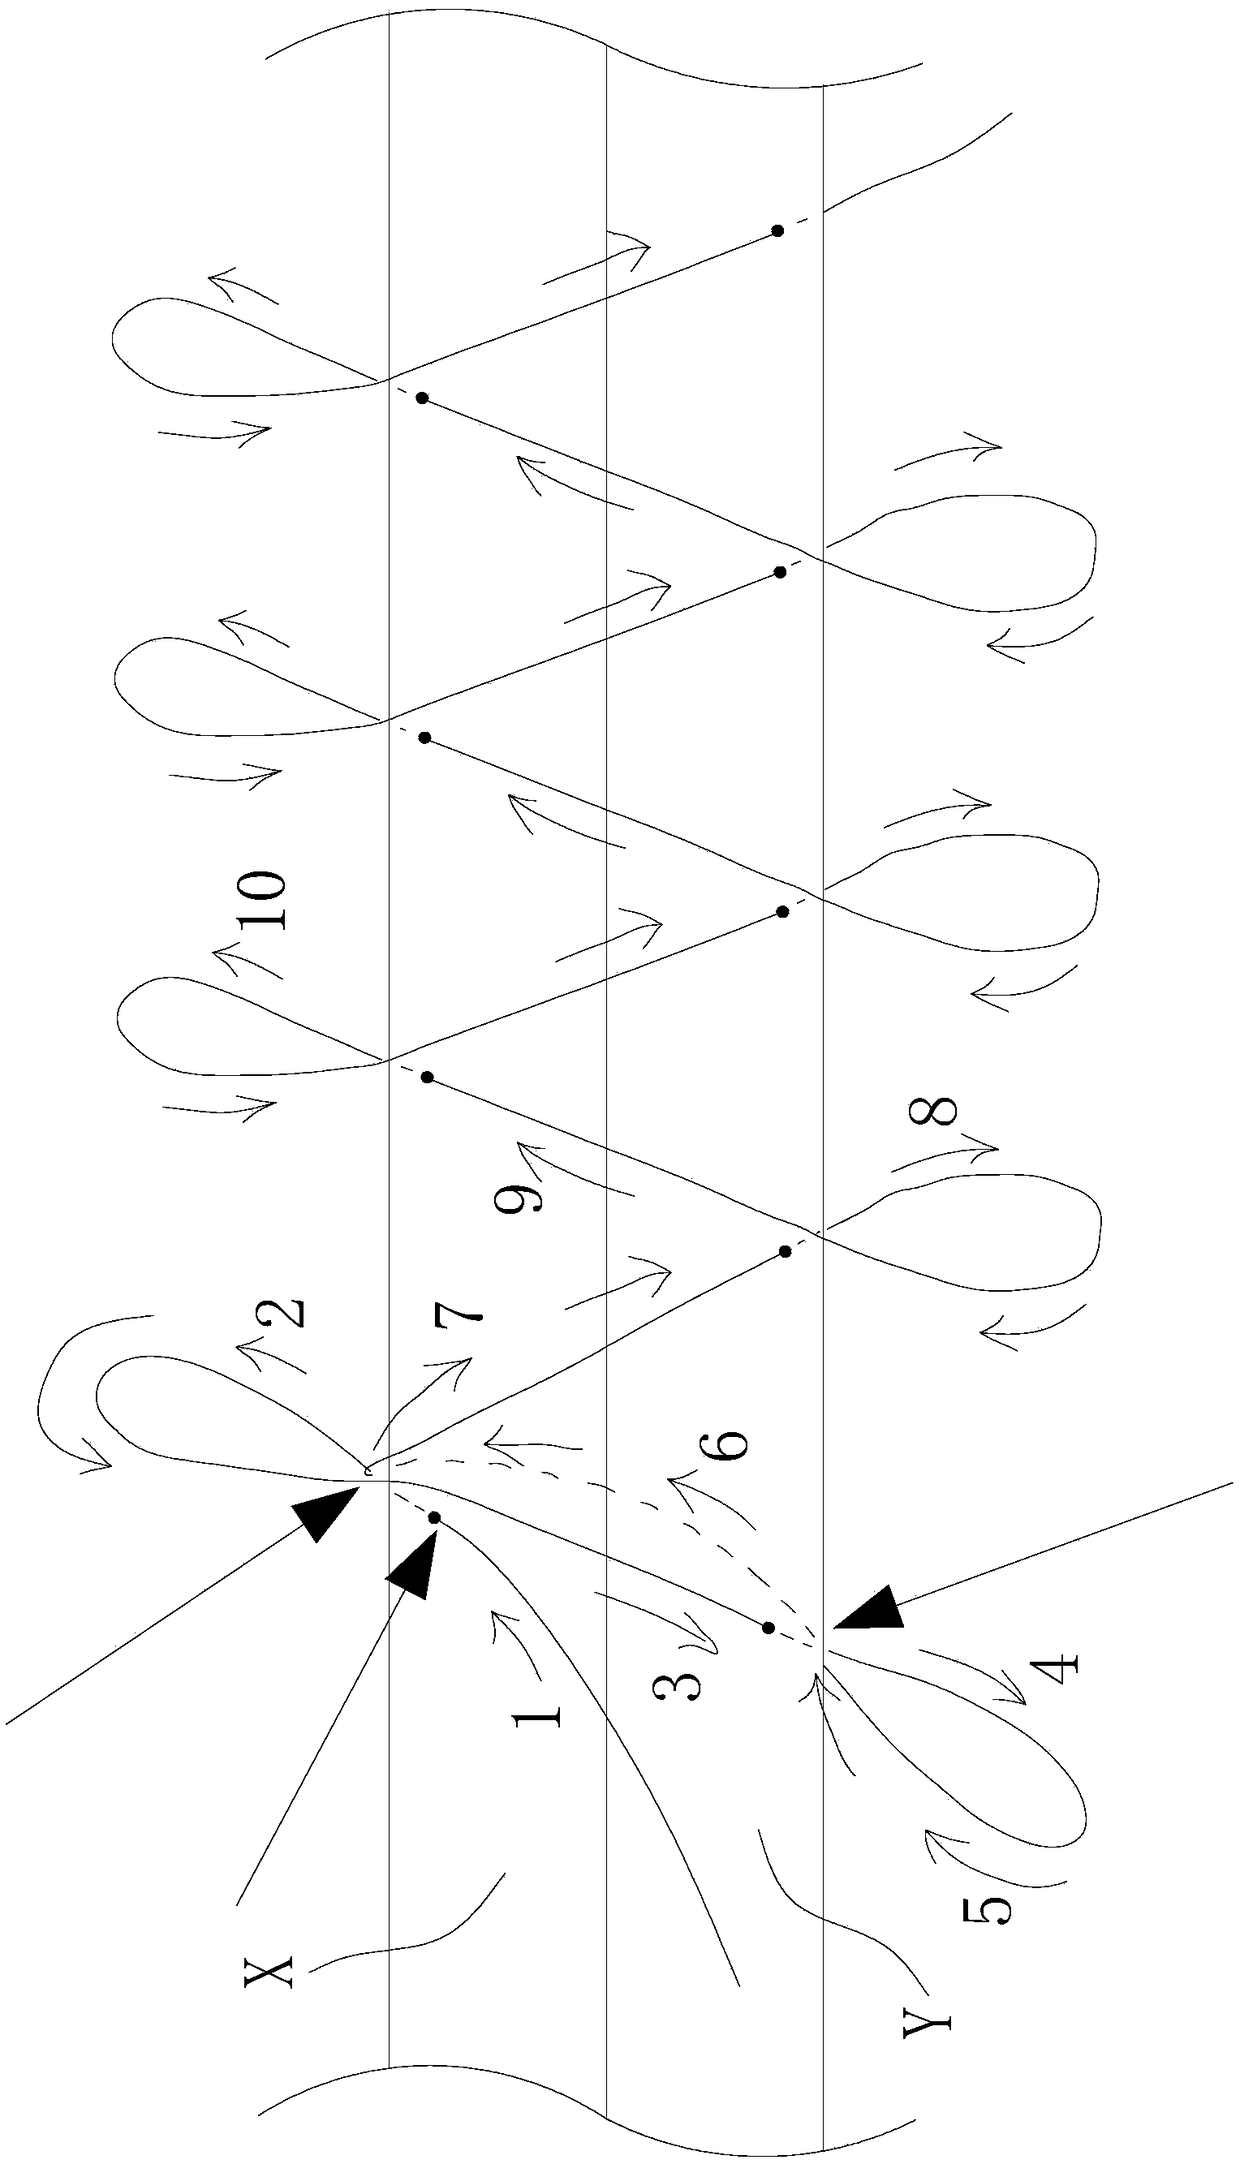 Splicing needle method for splicing and sewing double-sided fabrics